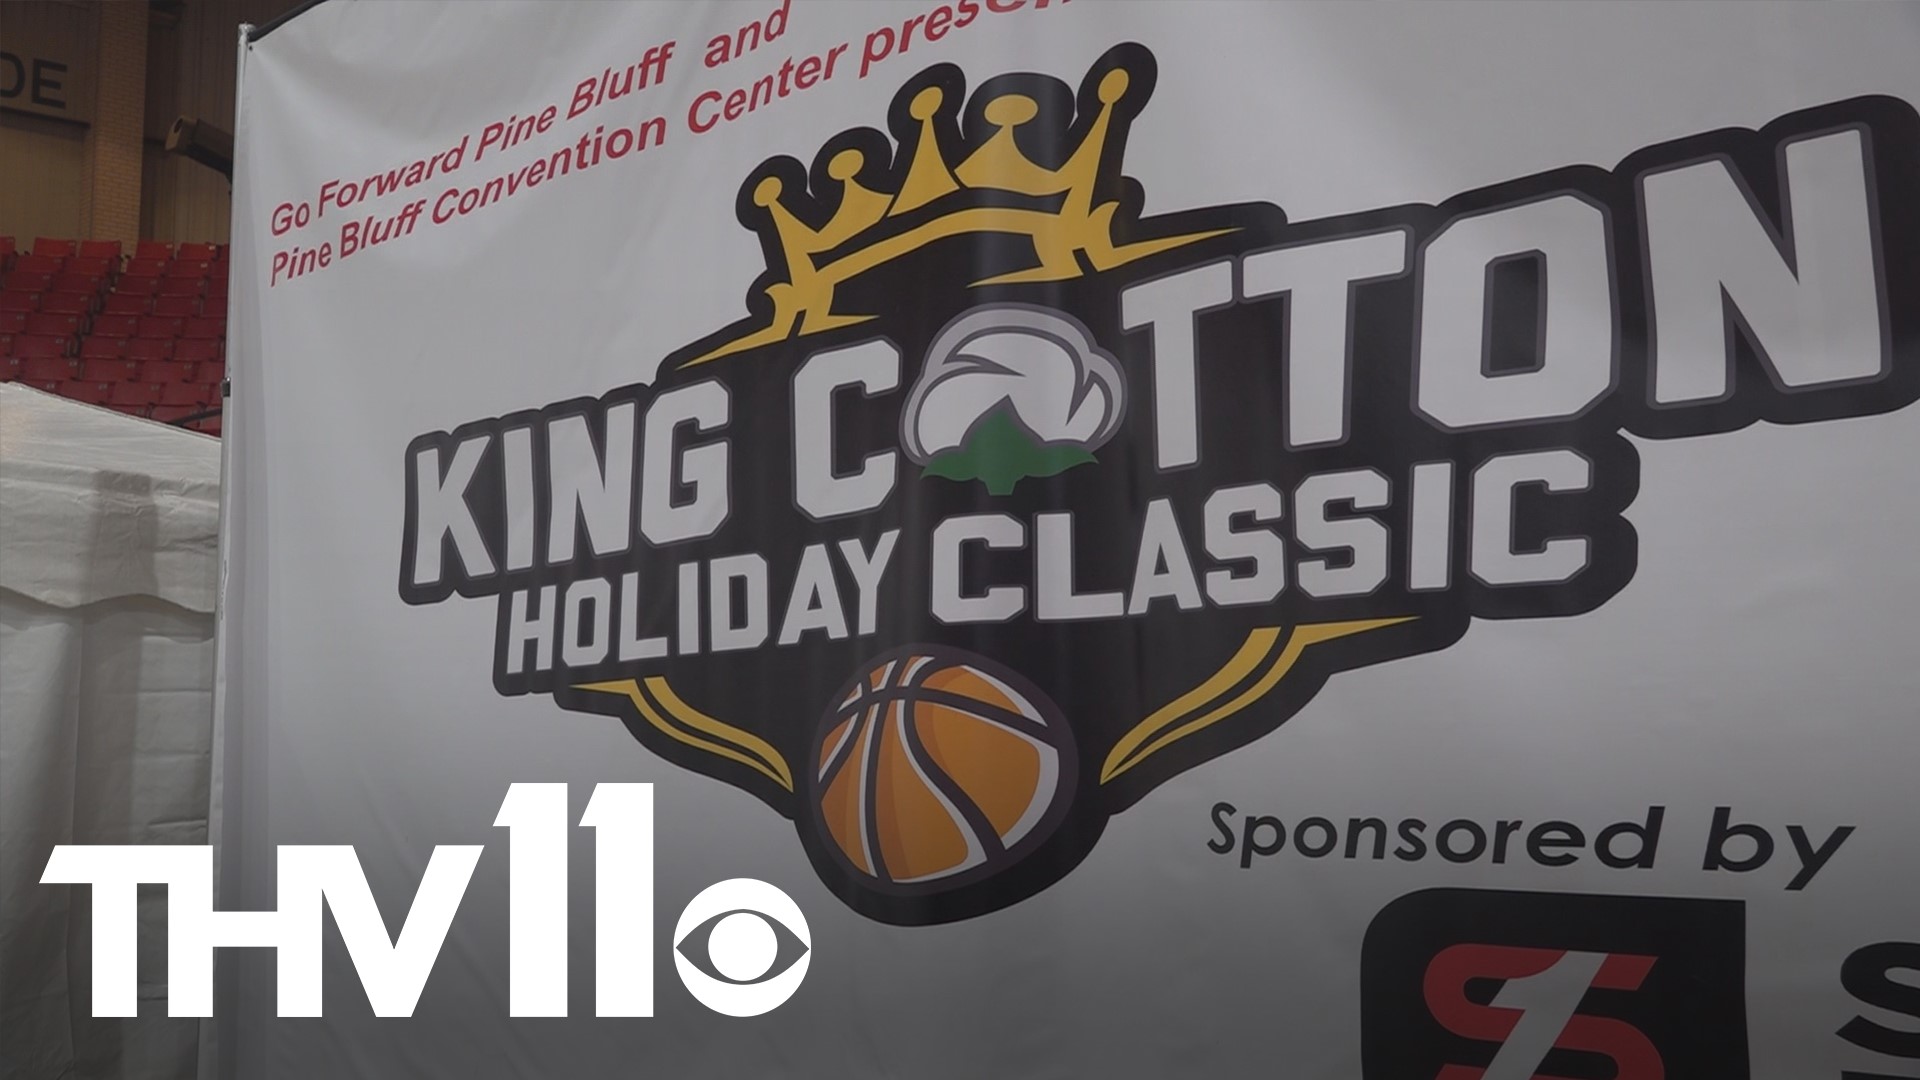 Hundreds of people and several basketball teams from around the country are gathering in Pine Bluff as the King Cotton Holiday Classic makes it return.